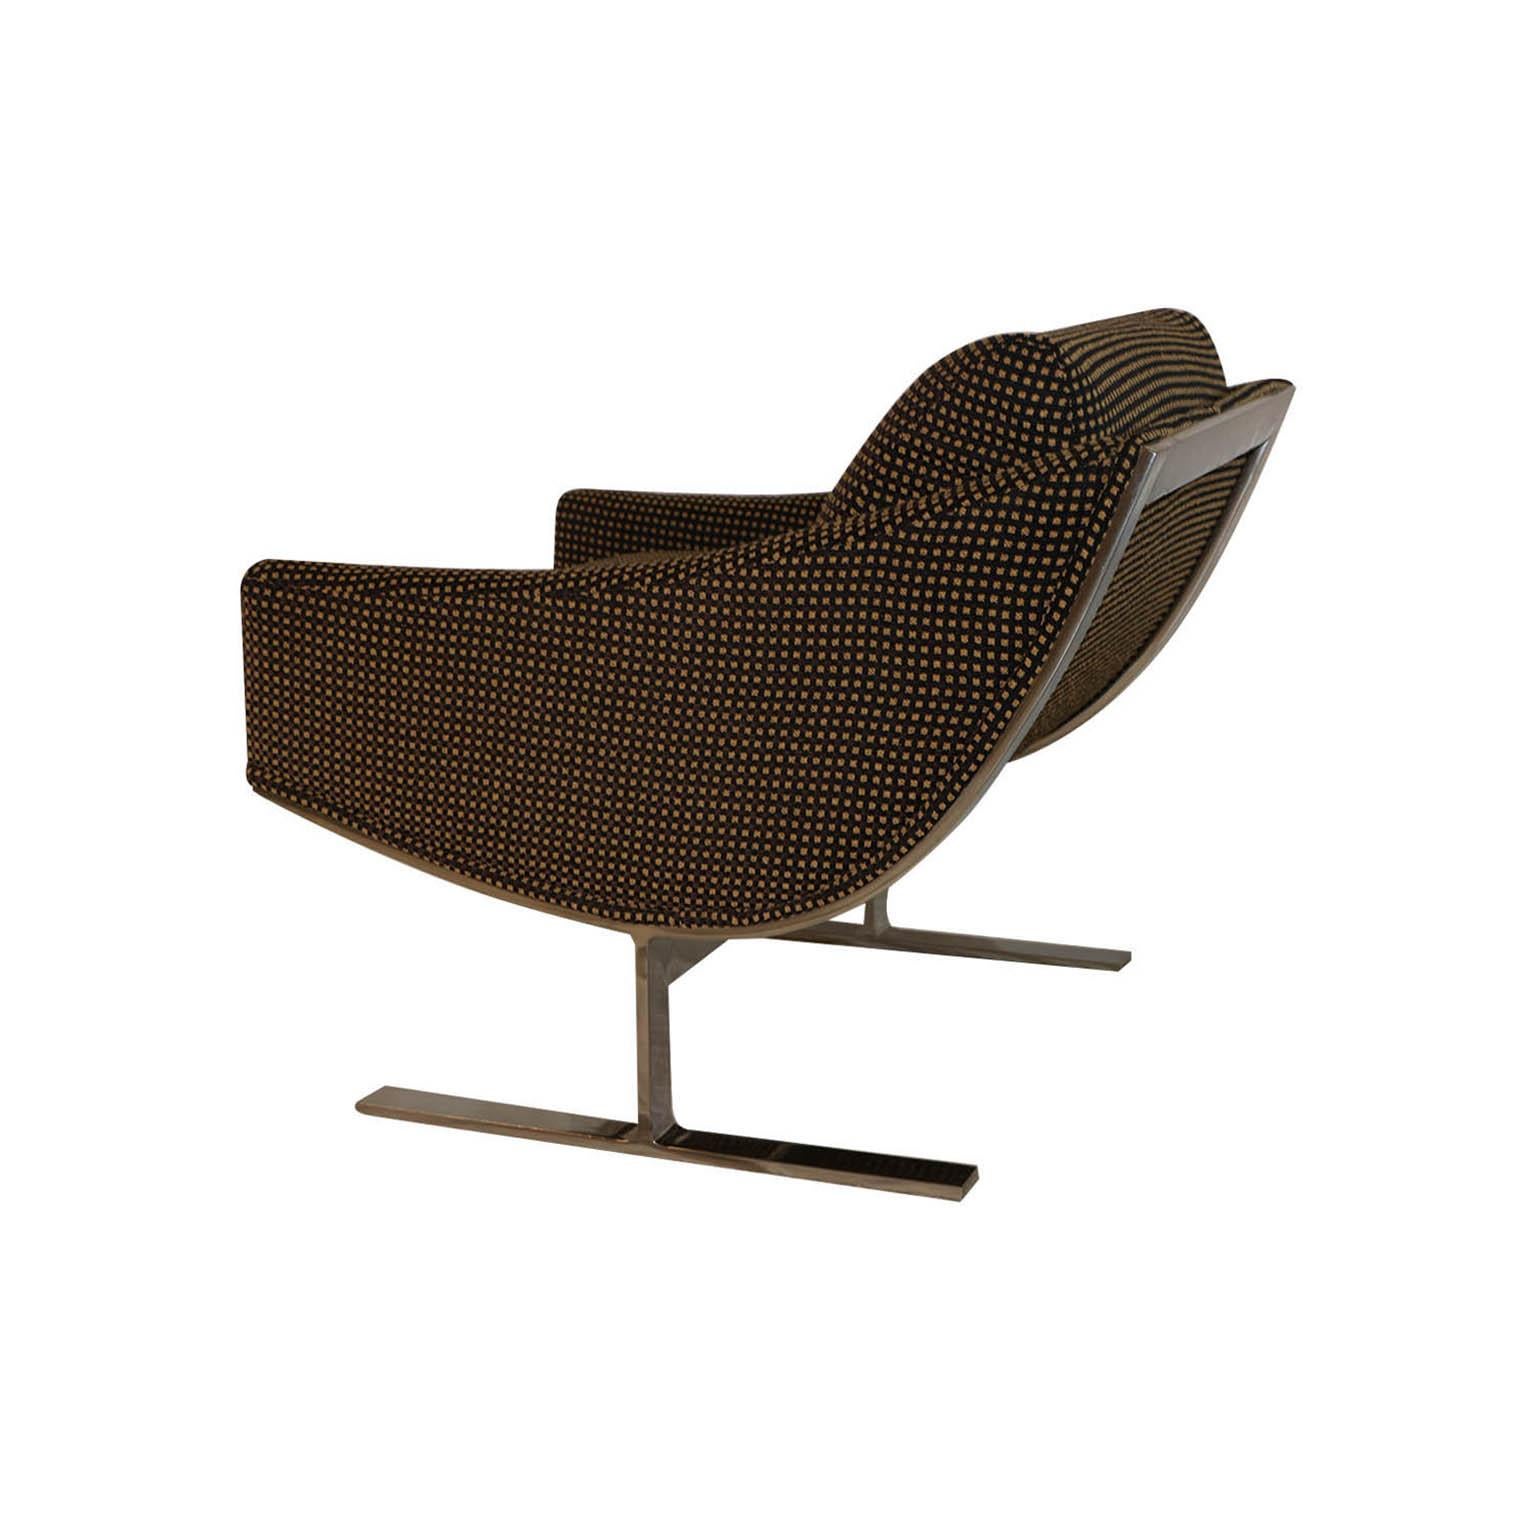 American Midcentury Kipp Stewart “Arc Lounge Chairs” for Directional